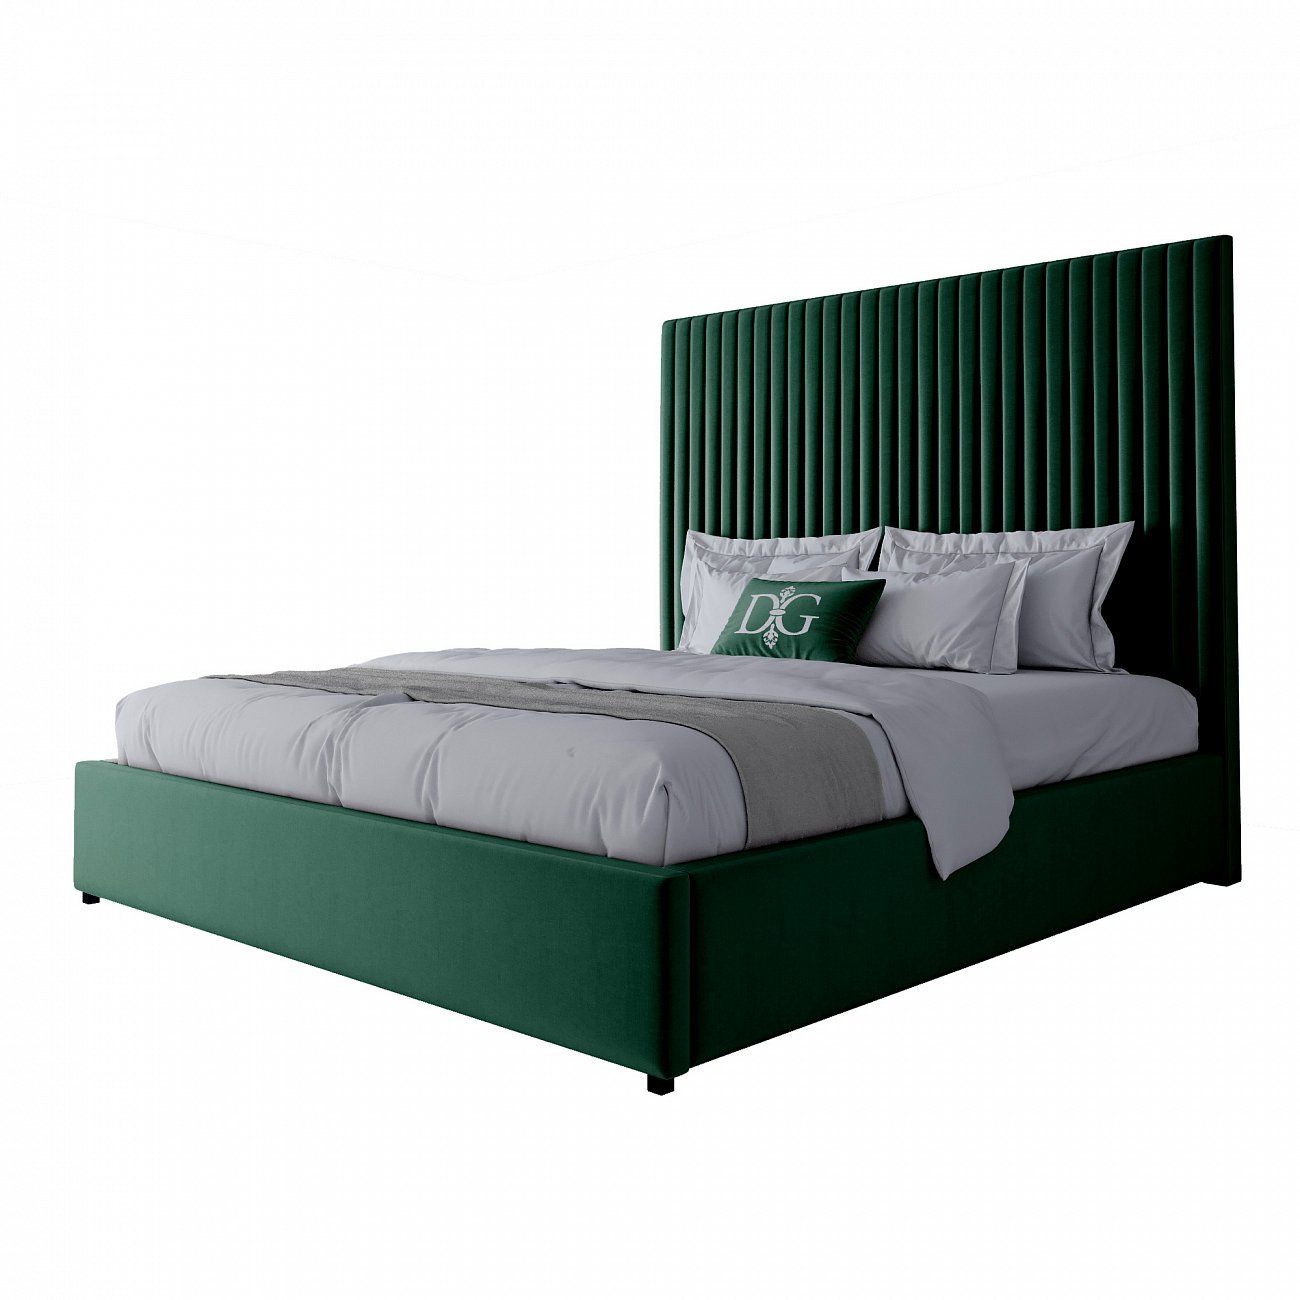 Double bed 180x200 cm green Mora